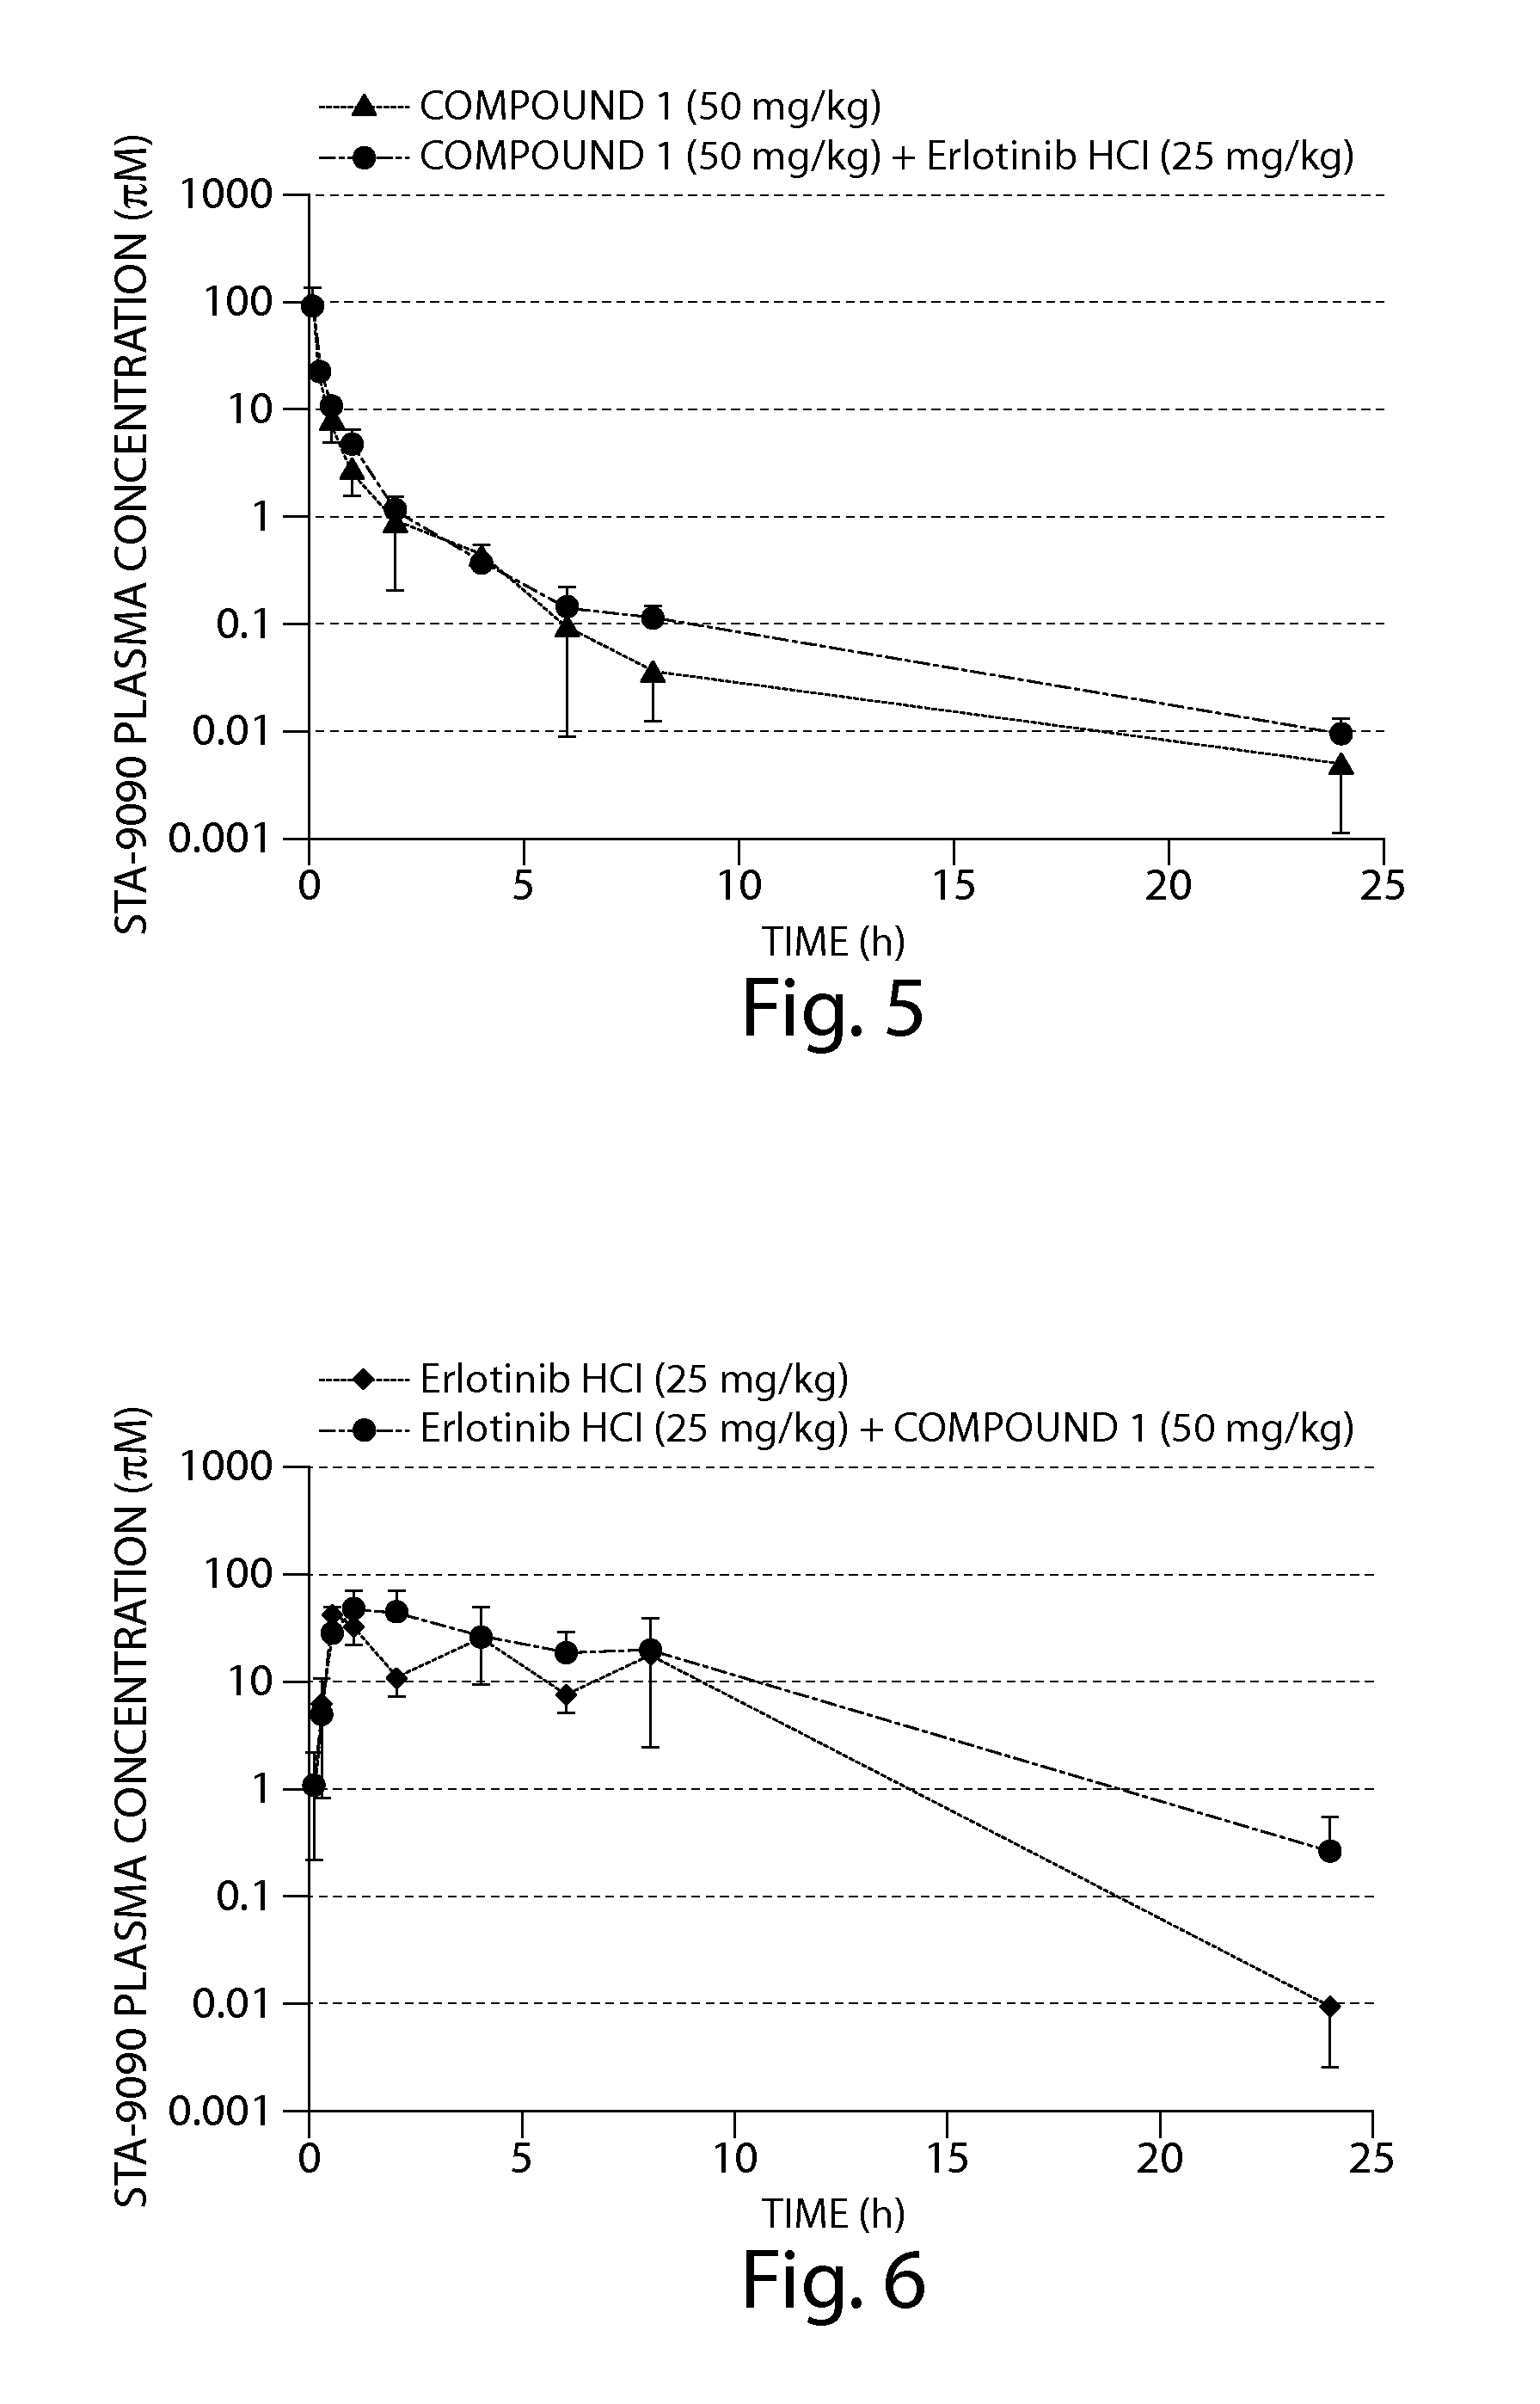 Cancer therapy using a combination of a hsp90 inhibitory compounds and a EGFR inhibitor